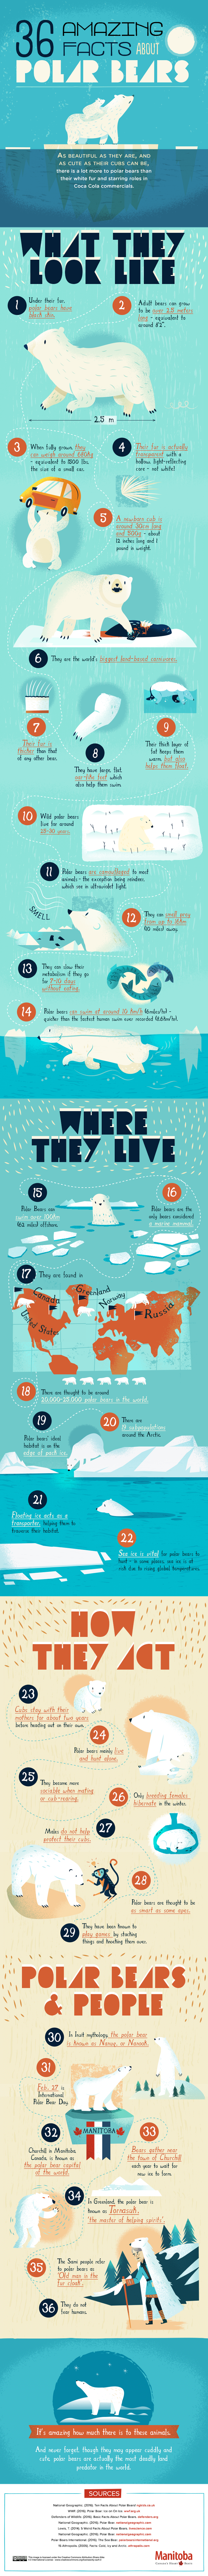 36 facts about polar bears